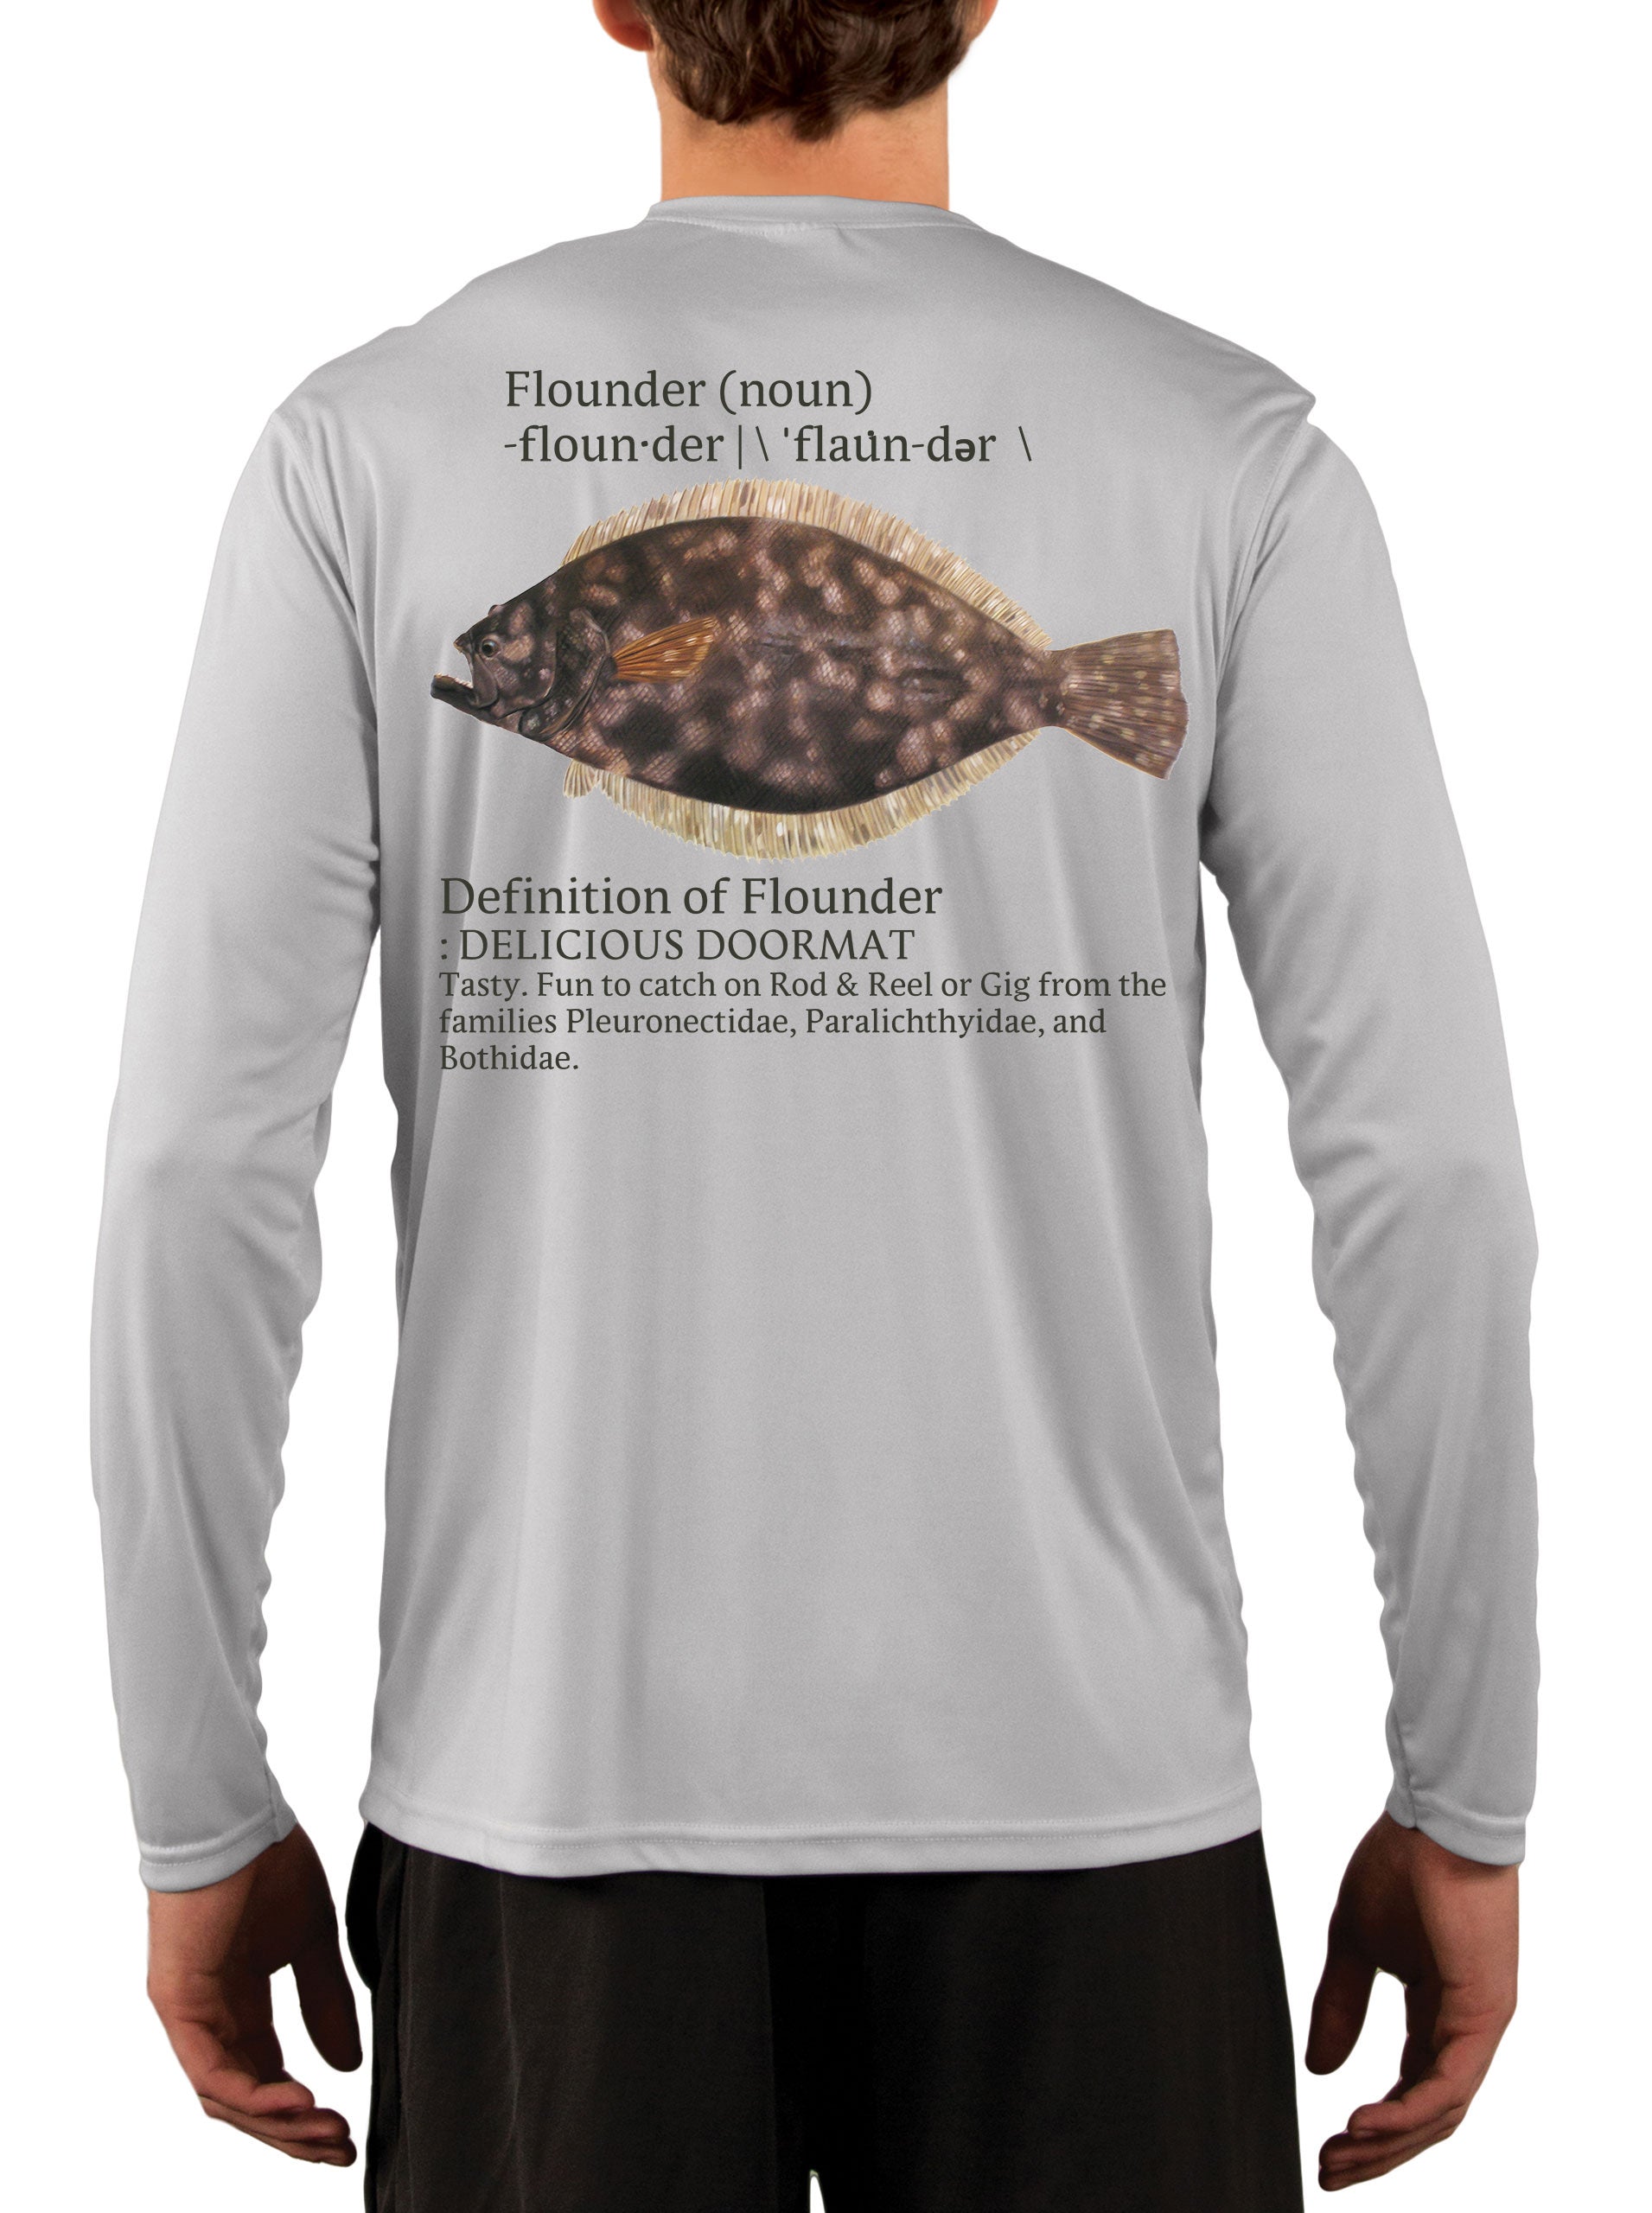 Flounder Fishing Shirts for Men Fluke - UV Protected +50 Sun Protection with Moisture Wicking Technology 4XL / Pearl Gray